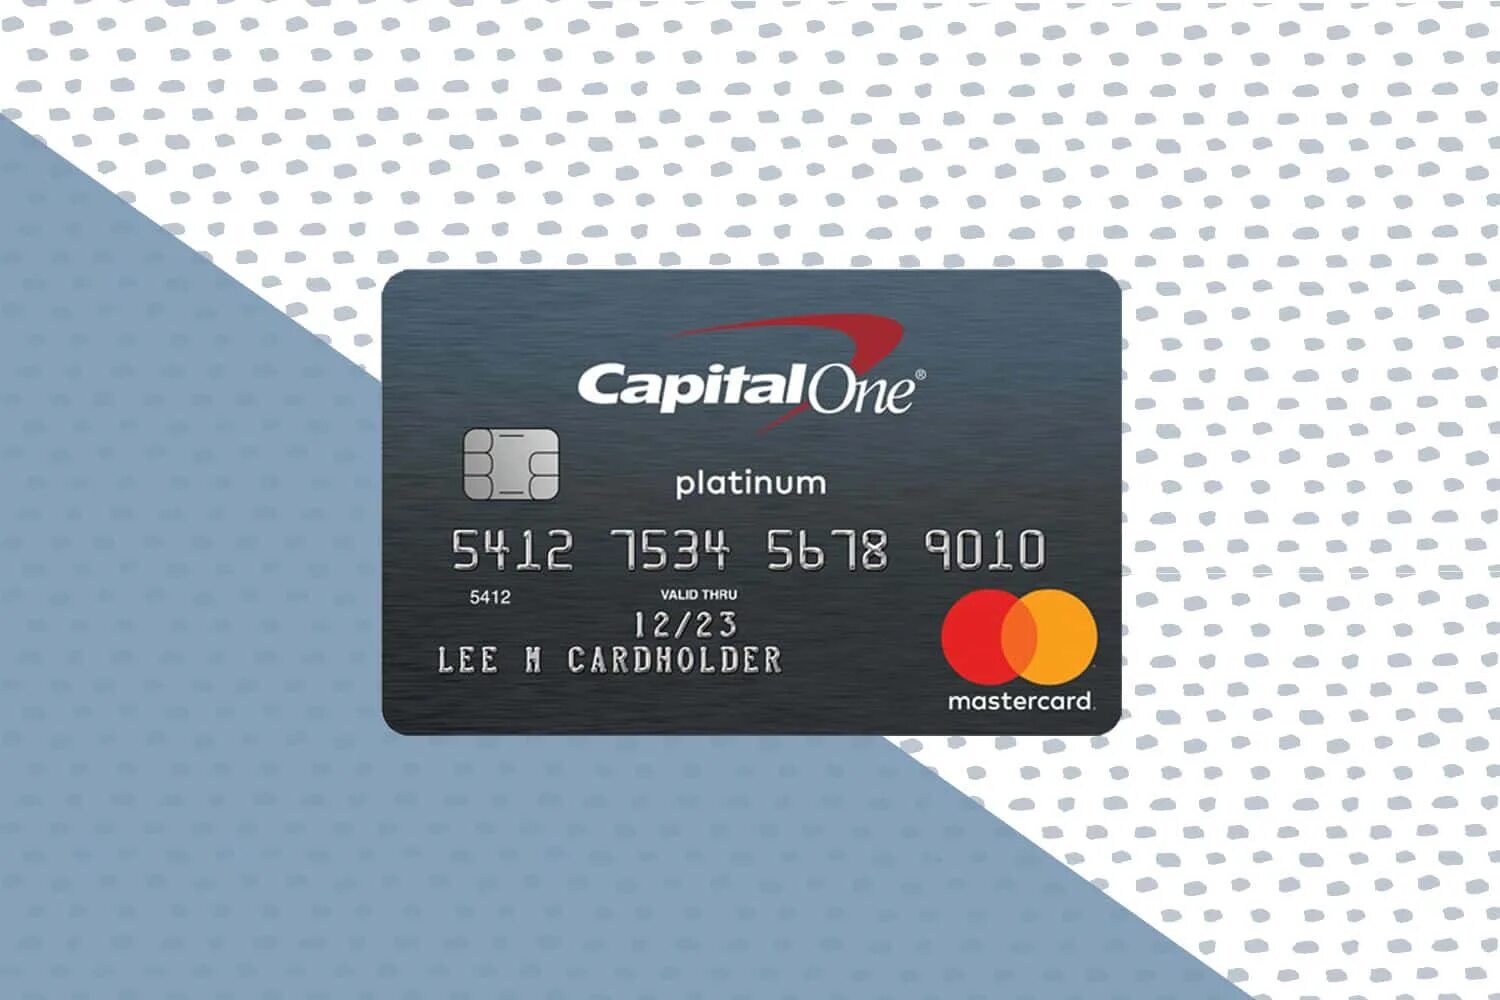 Capital one карта. Capital one Platinum Card. Credit one Bank Card. Capital one Business Card.